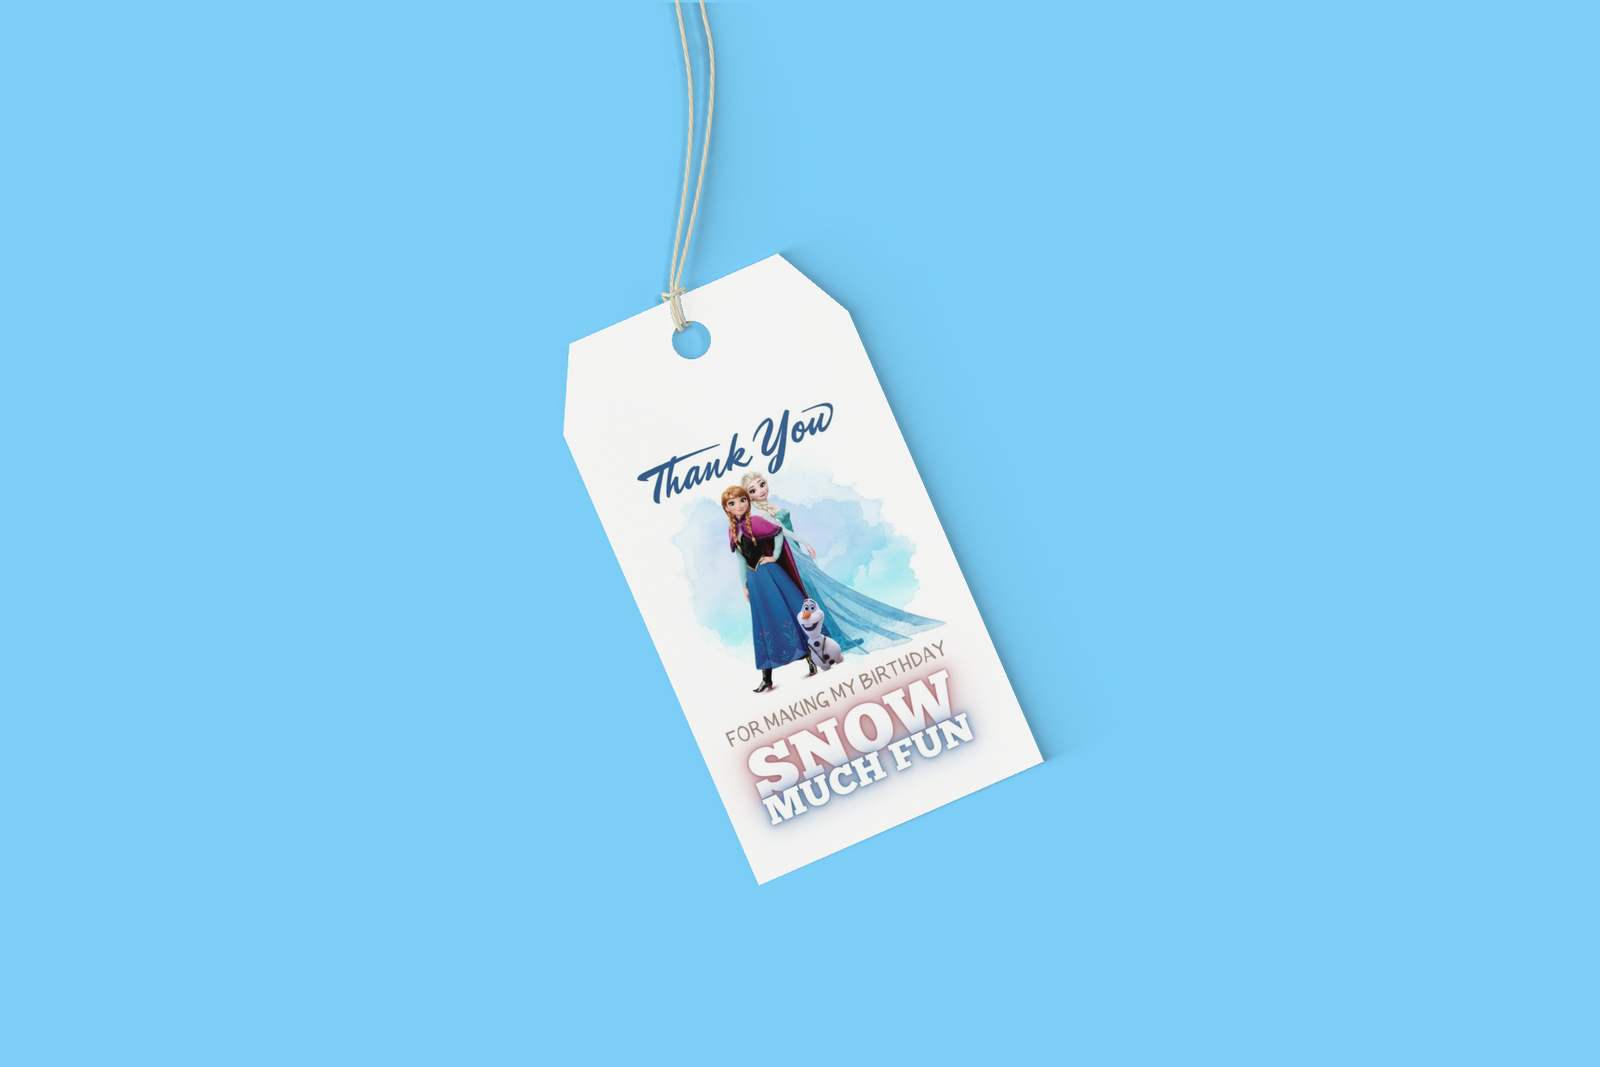 Frozen Theme Model 2 Birthday Favour Tags (2 x 3.5 inches/250 GSM Cardstock/Mixcolour/30Pcs)